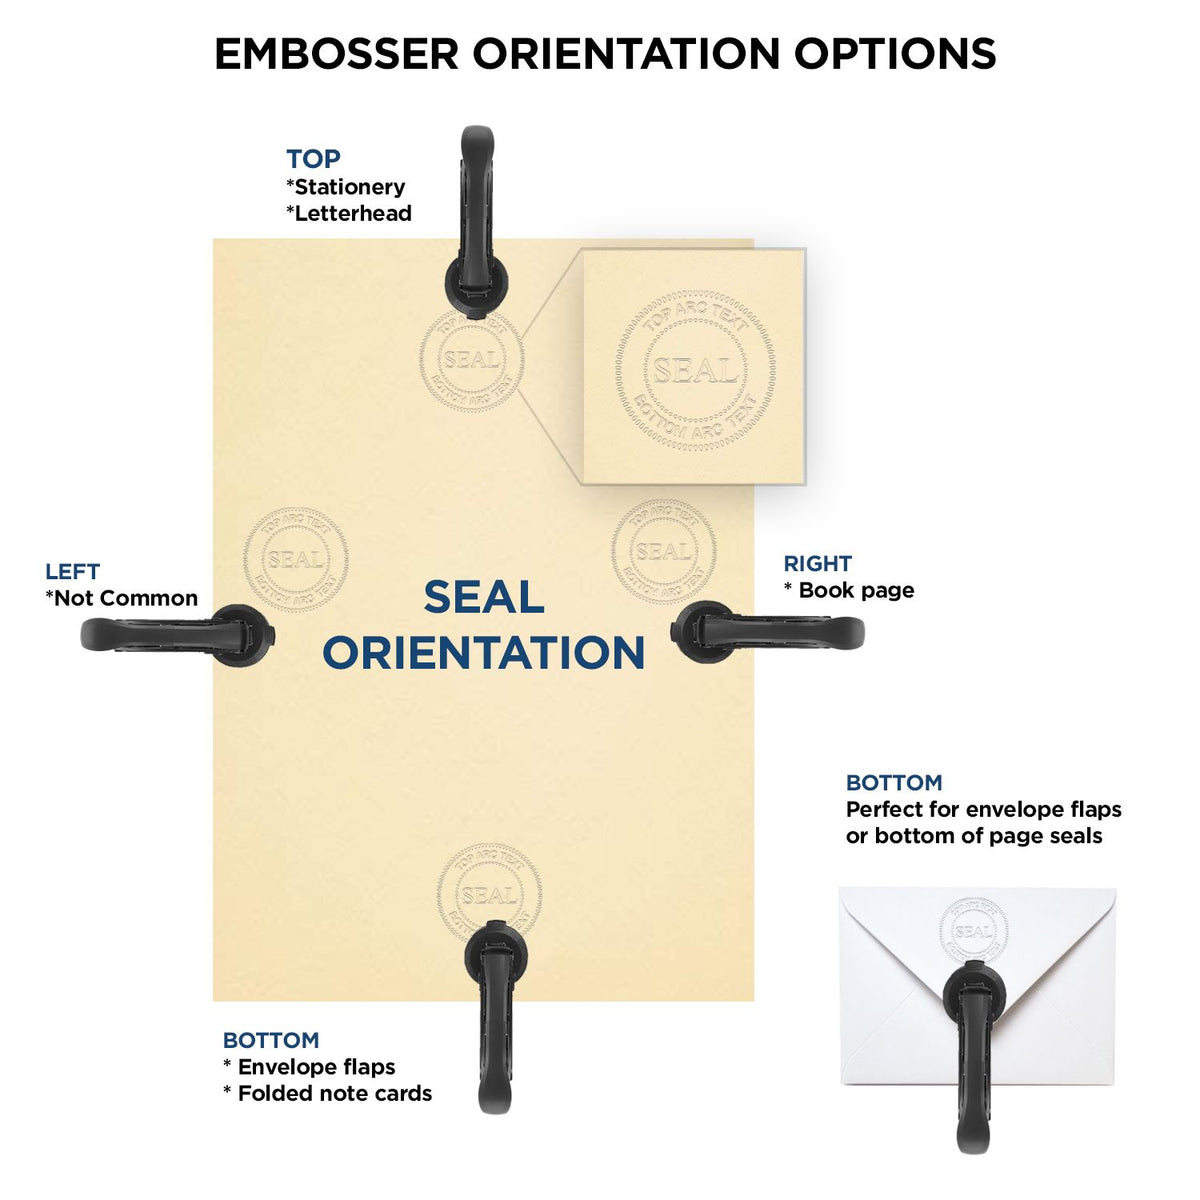 An infographic for the Heavy Duty Cast Iron New Jersey Geologist Seal Embosser showing embosser orientation, this is showing examples of a top, bottom, right and left insert.